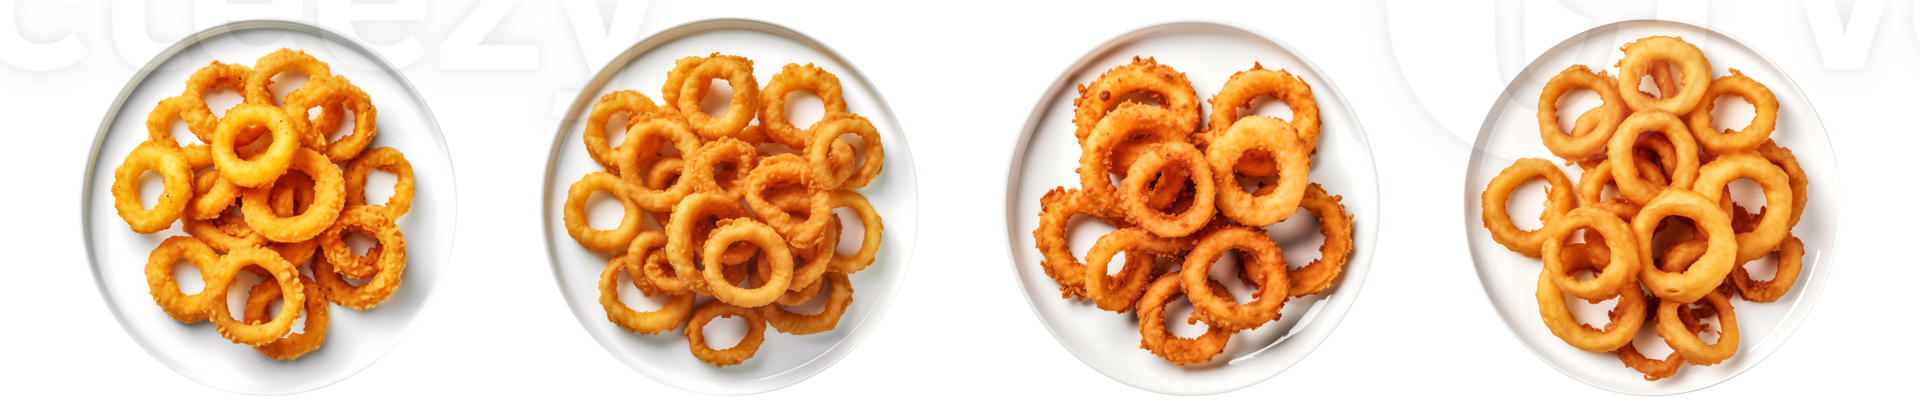 Fried Onion Rings on white plate, top view with transparent background, Technology png